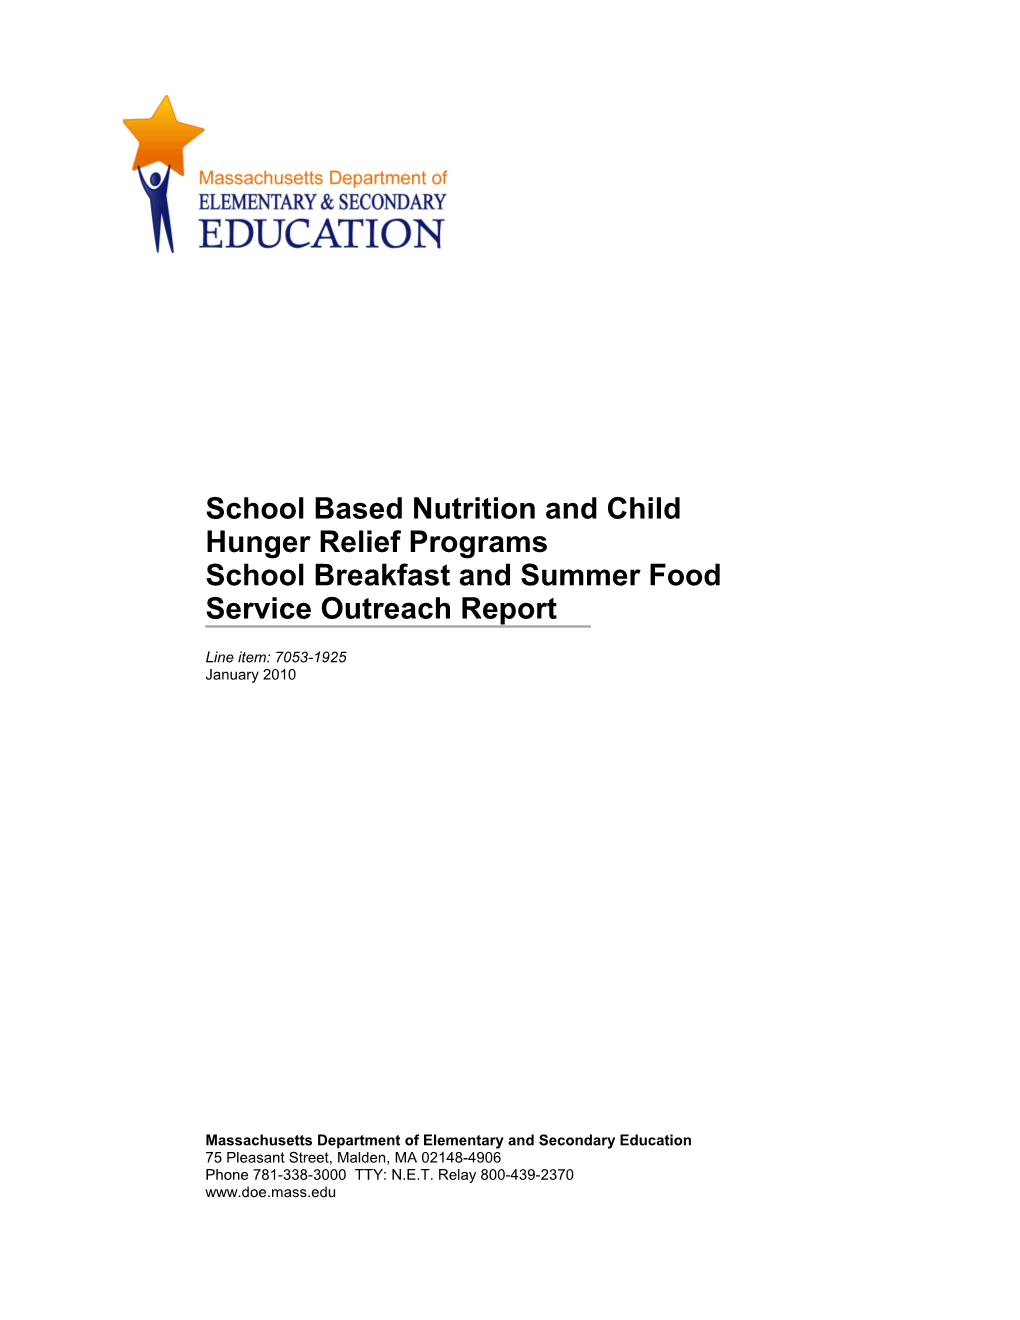 School Based Nutrition and Child Hunger Relief Programs